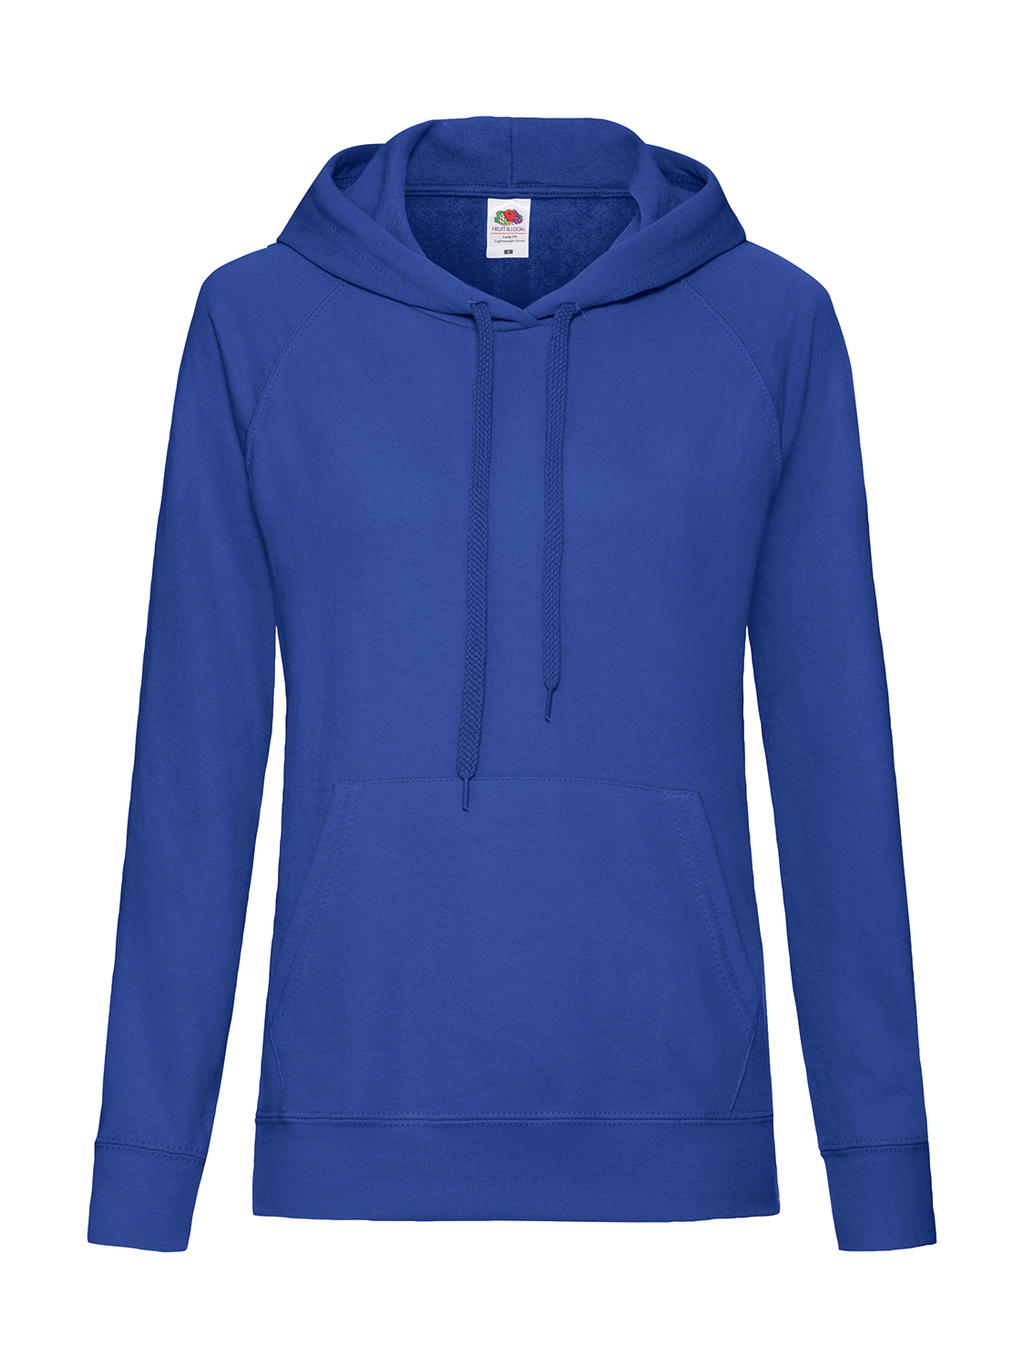  Ladies Lightweight Hooded Sweat in Farbe Royal